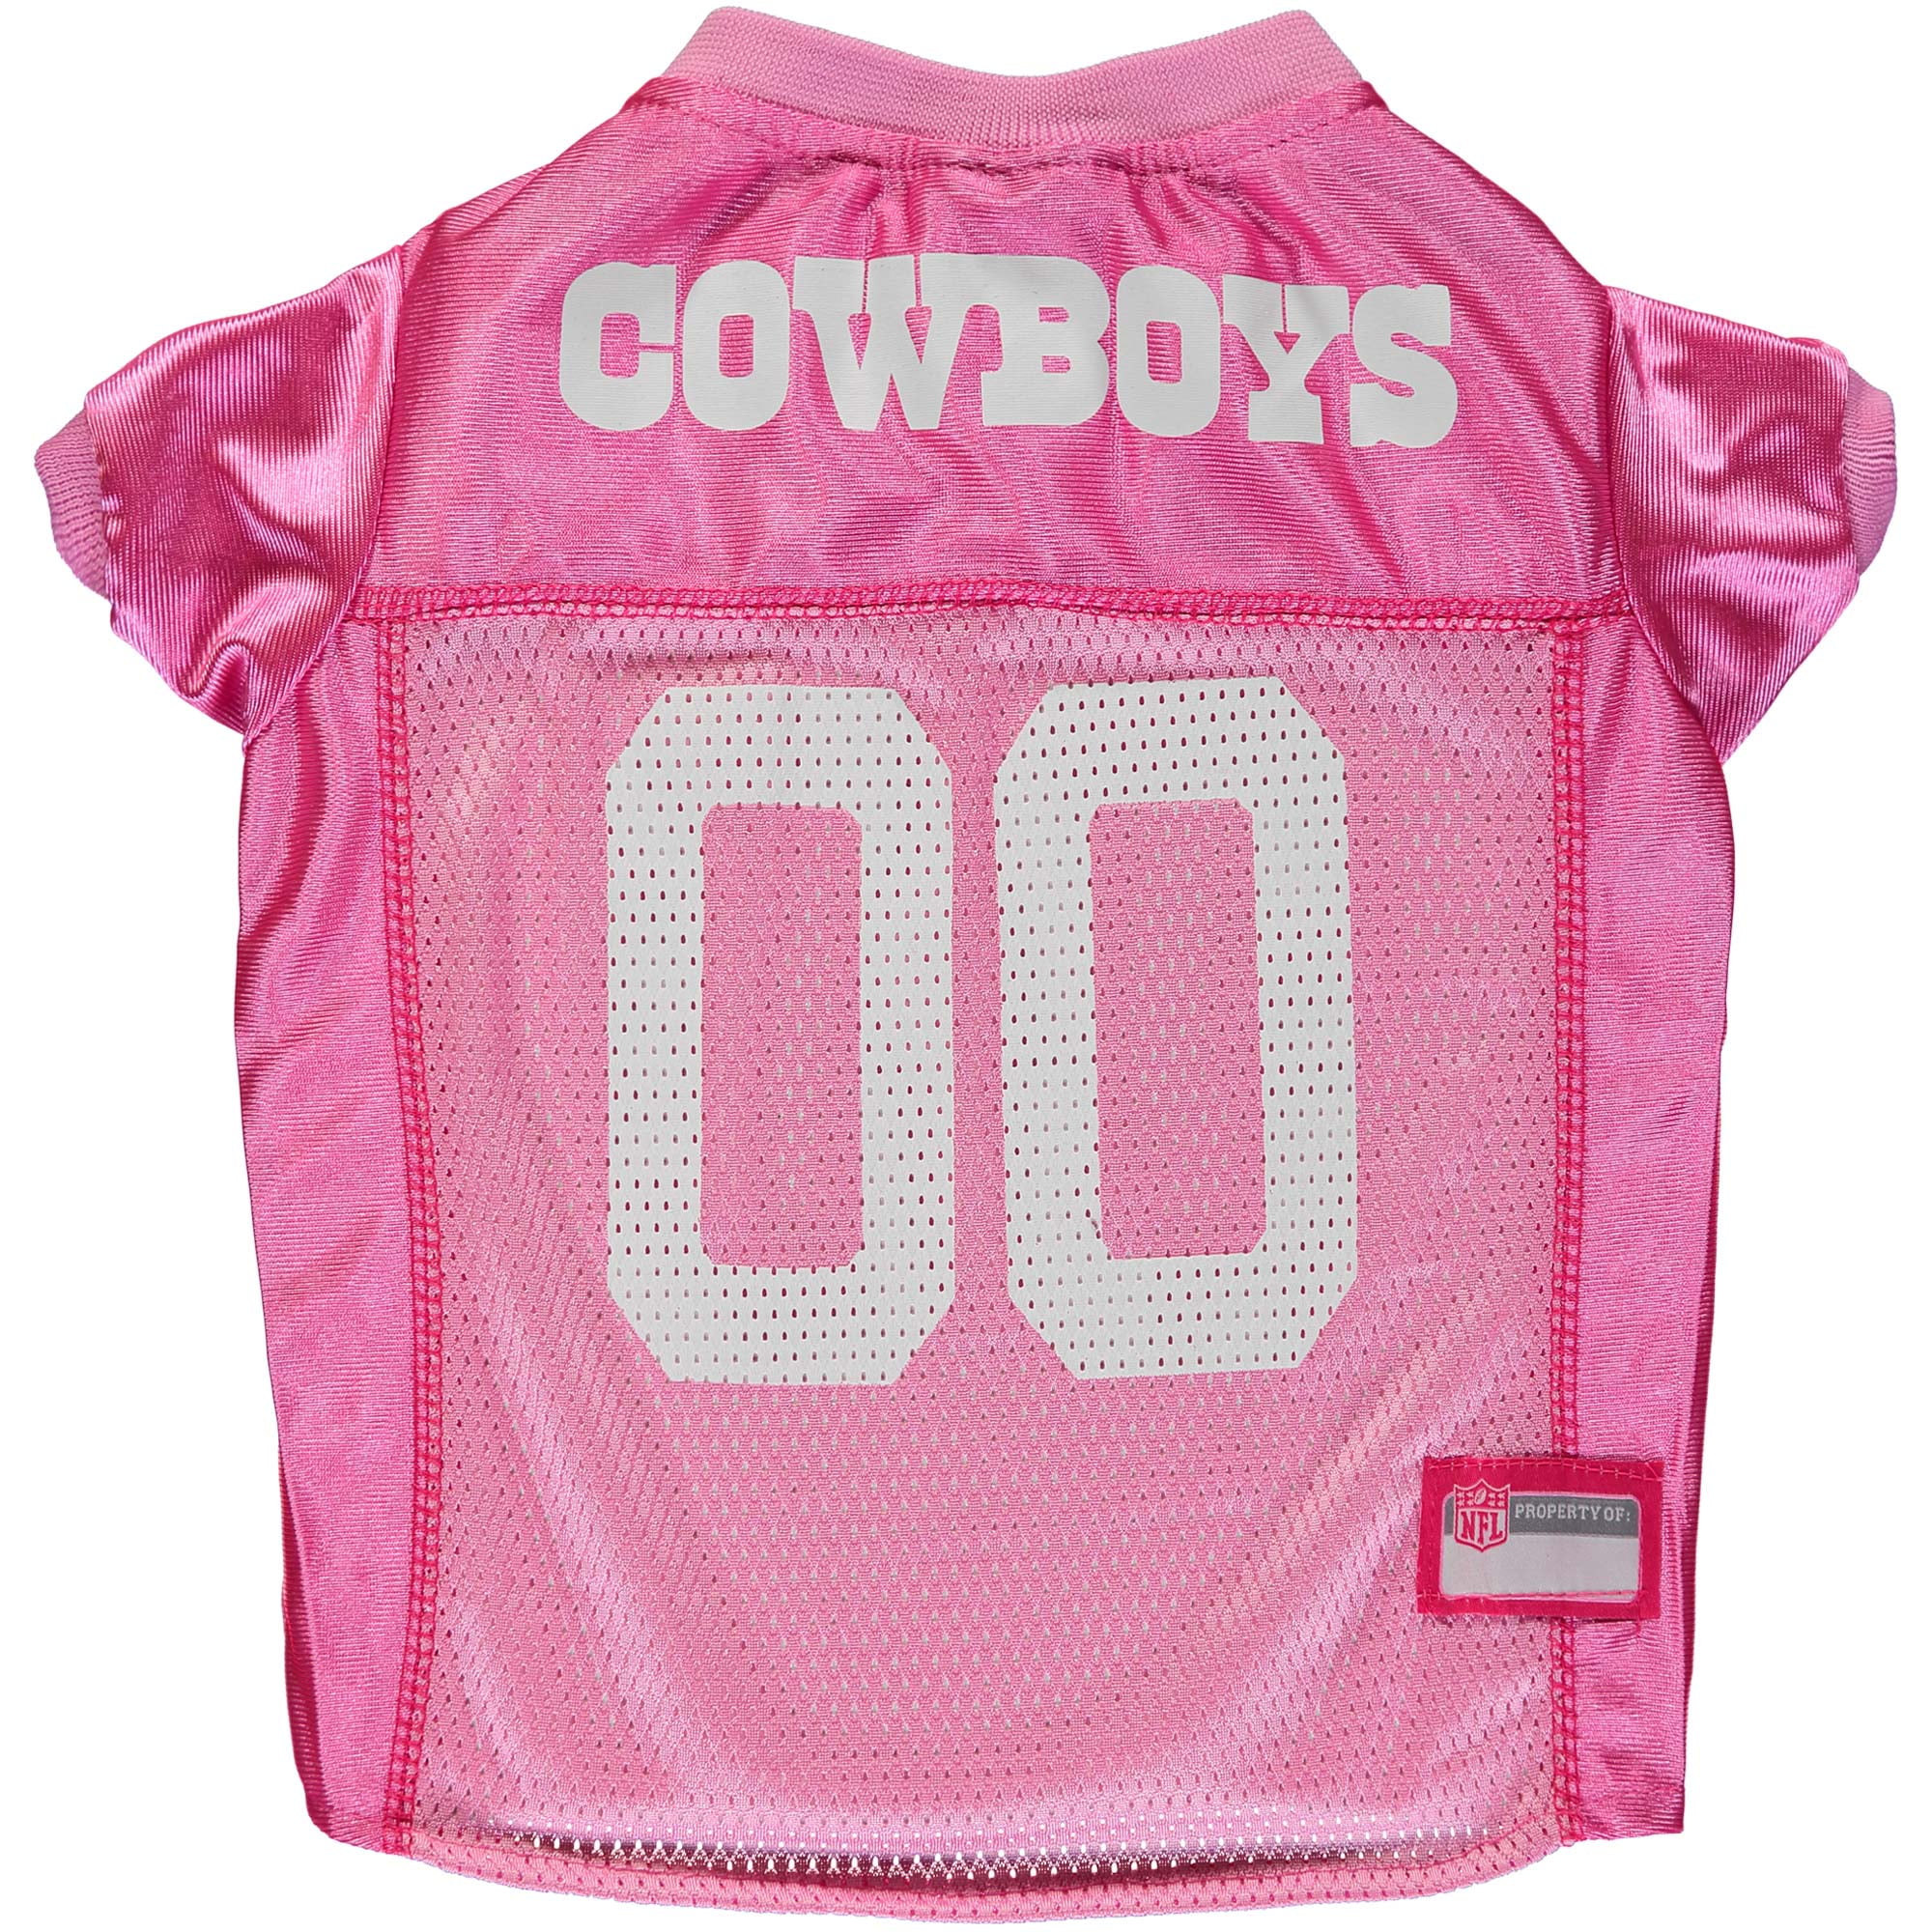  NFL Dallas Cowboys Dog Jersey, Size: Small. Best